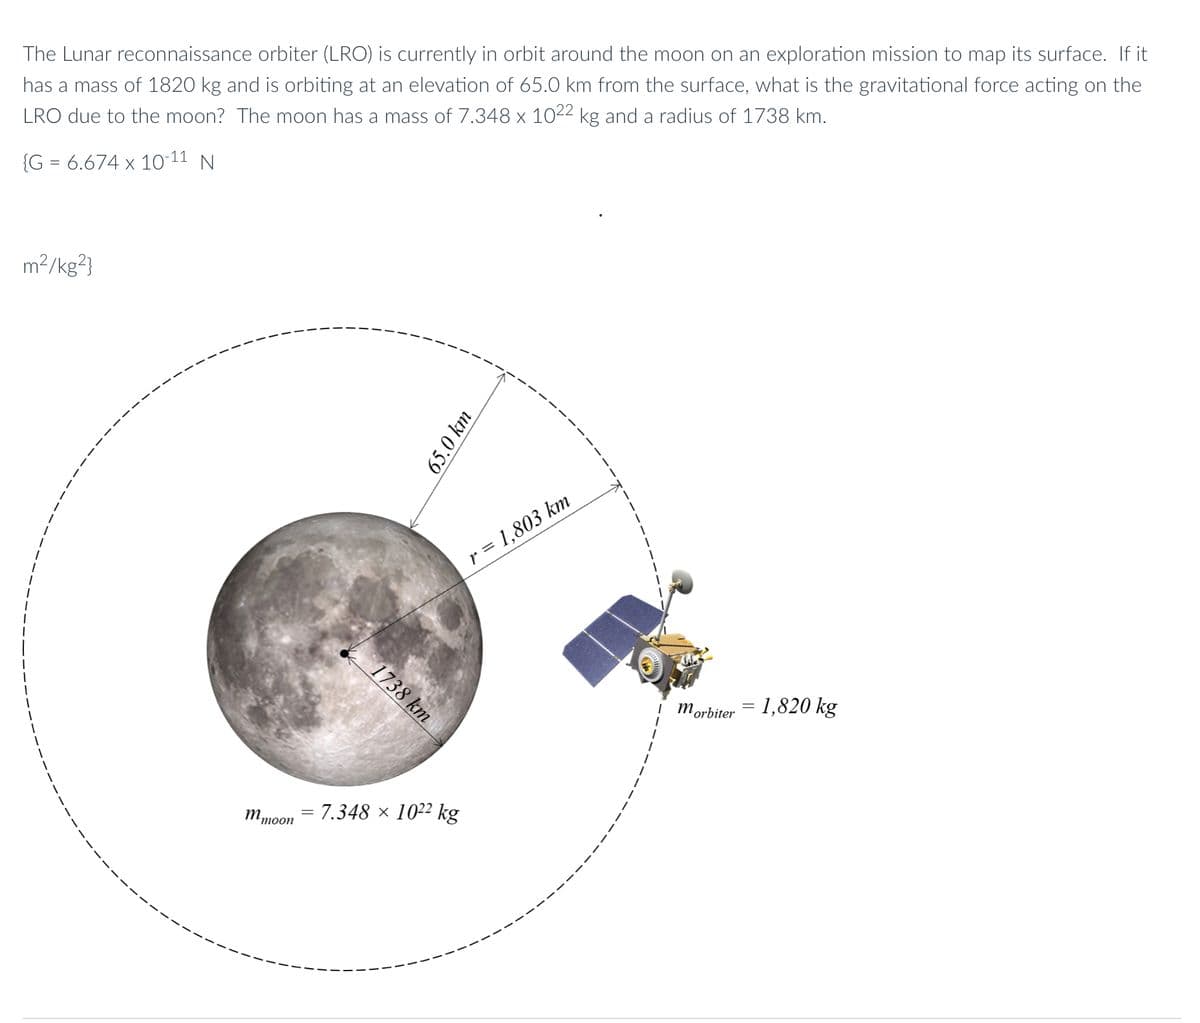 The Lunar reconnaissance orbiter (LRO) is currently in orbit around the moon on an exploration mission to map its surface. If it
has a mass of 1820 kg and is orbiting at an elevation of 65.0 km from the surface, what is the gravitational force acting on the
LRO due to the moon? The moon has a mass of 7.348 x 1022 kg and a radius of 1738 km.
{G = 6.674 x 10-11 N
m2/kg?}
r = 1,803 km
1738 km
I m,
Norbiter = 1,820 kg
mmoon
7.348 × 102² kg
65.0 km
